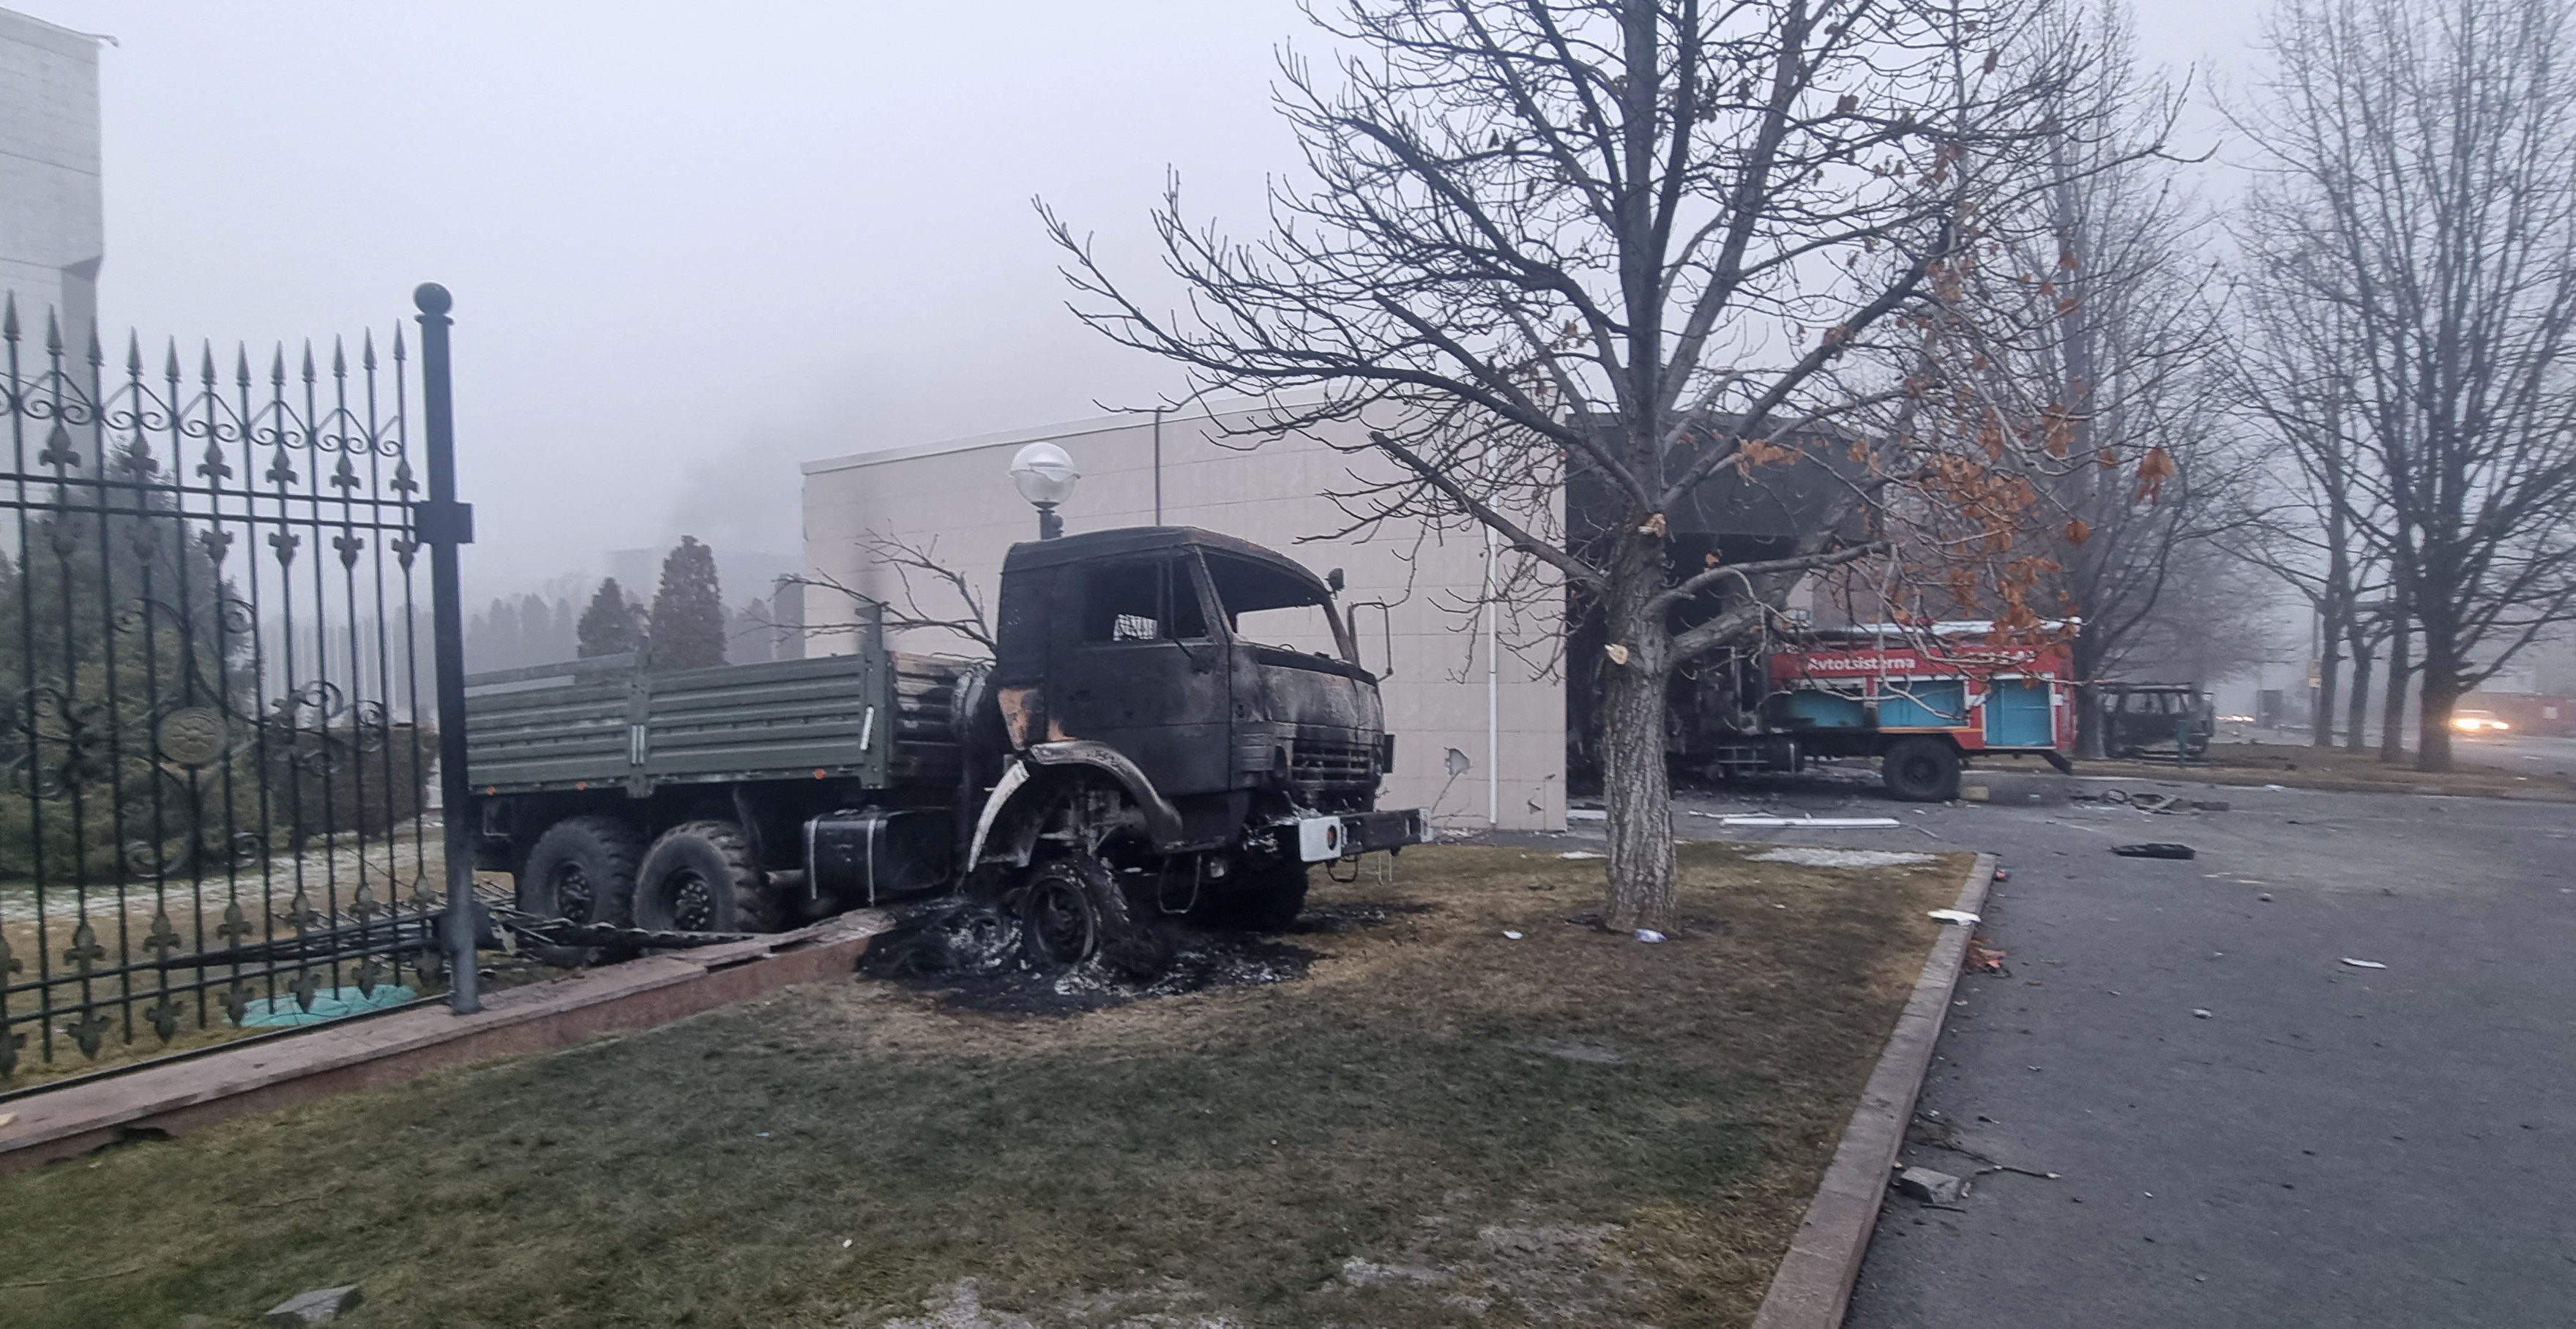 A burned truck is seen in front of the Presidential Residence in Almaty